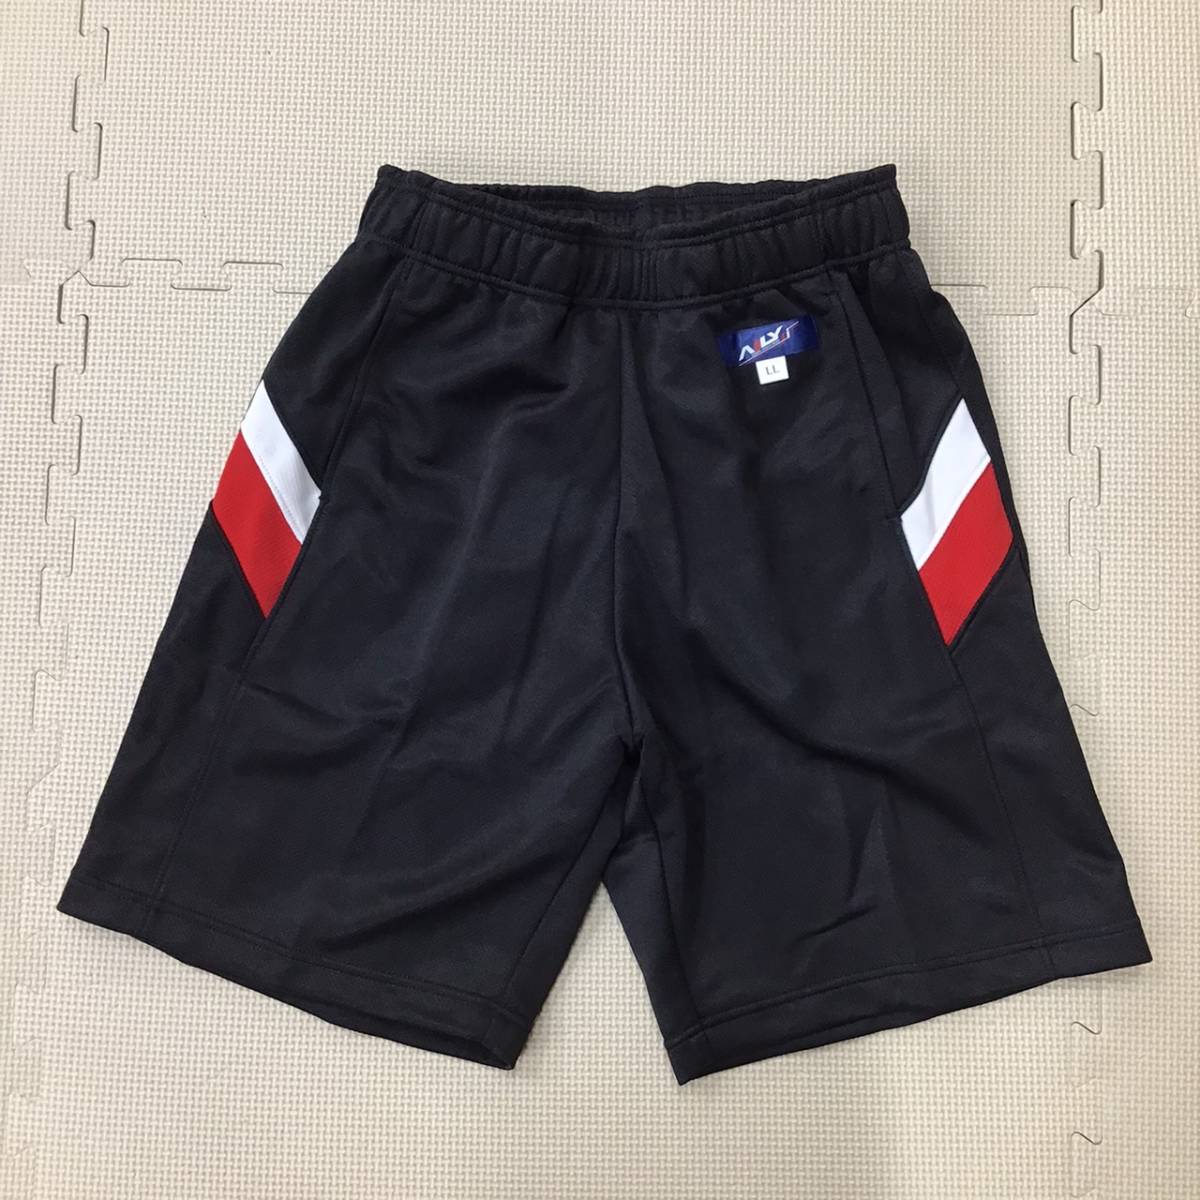 AL4-BLL new goods [ sphere river junior high school ]AILY shorts size LL / black × red × white / jersey / is - bread / short bread / sport wear / junior high school student / gym uniform / gym uniform 